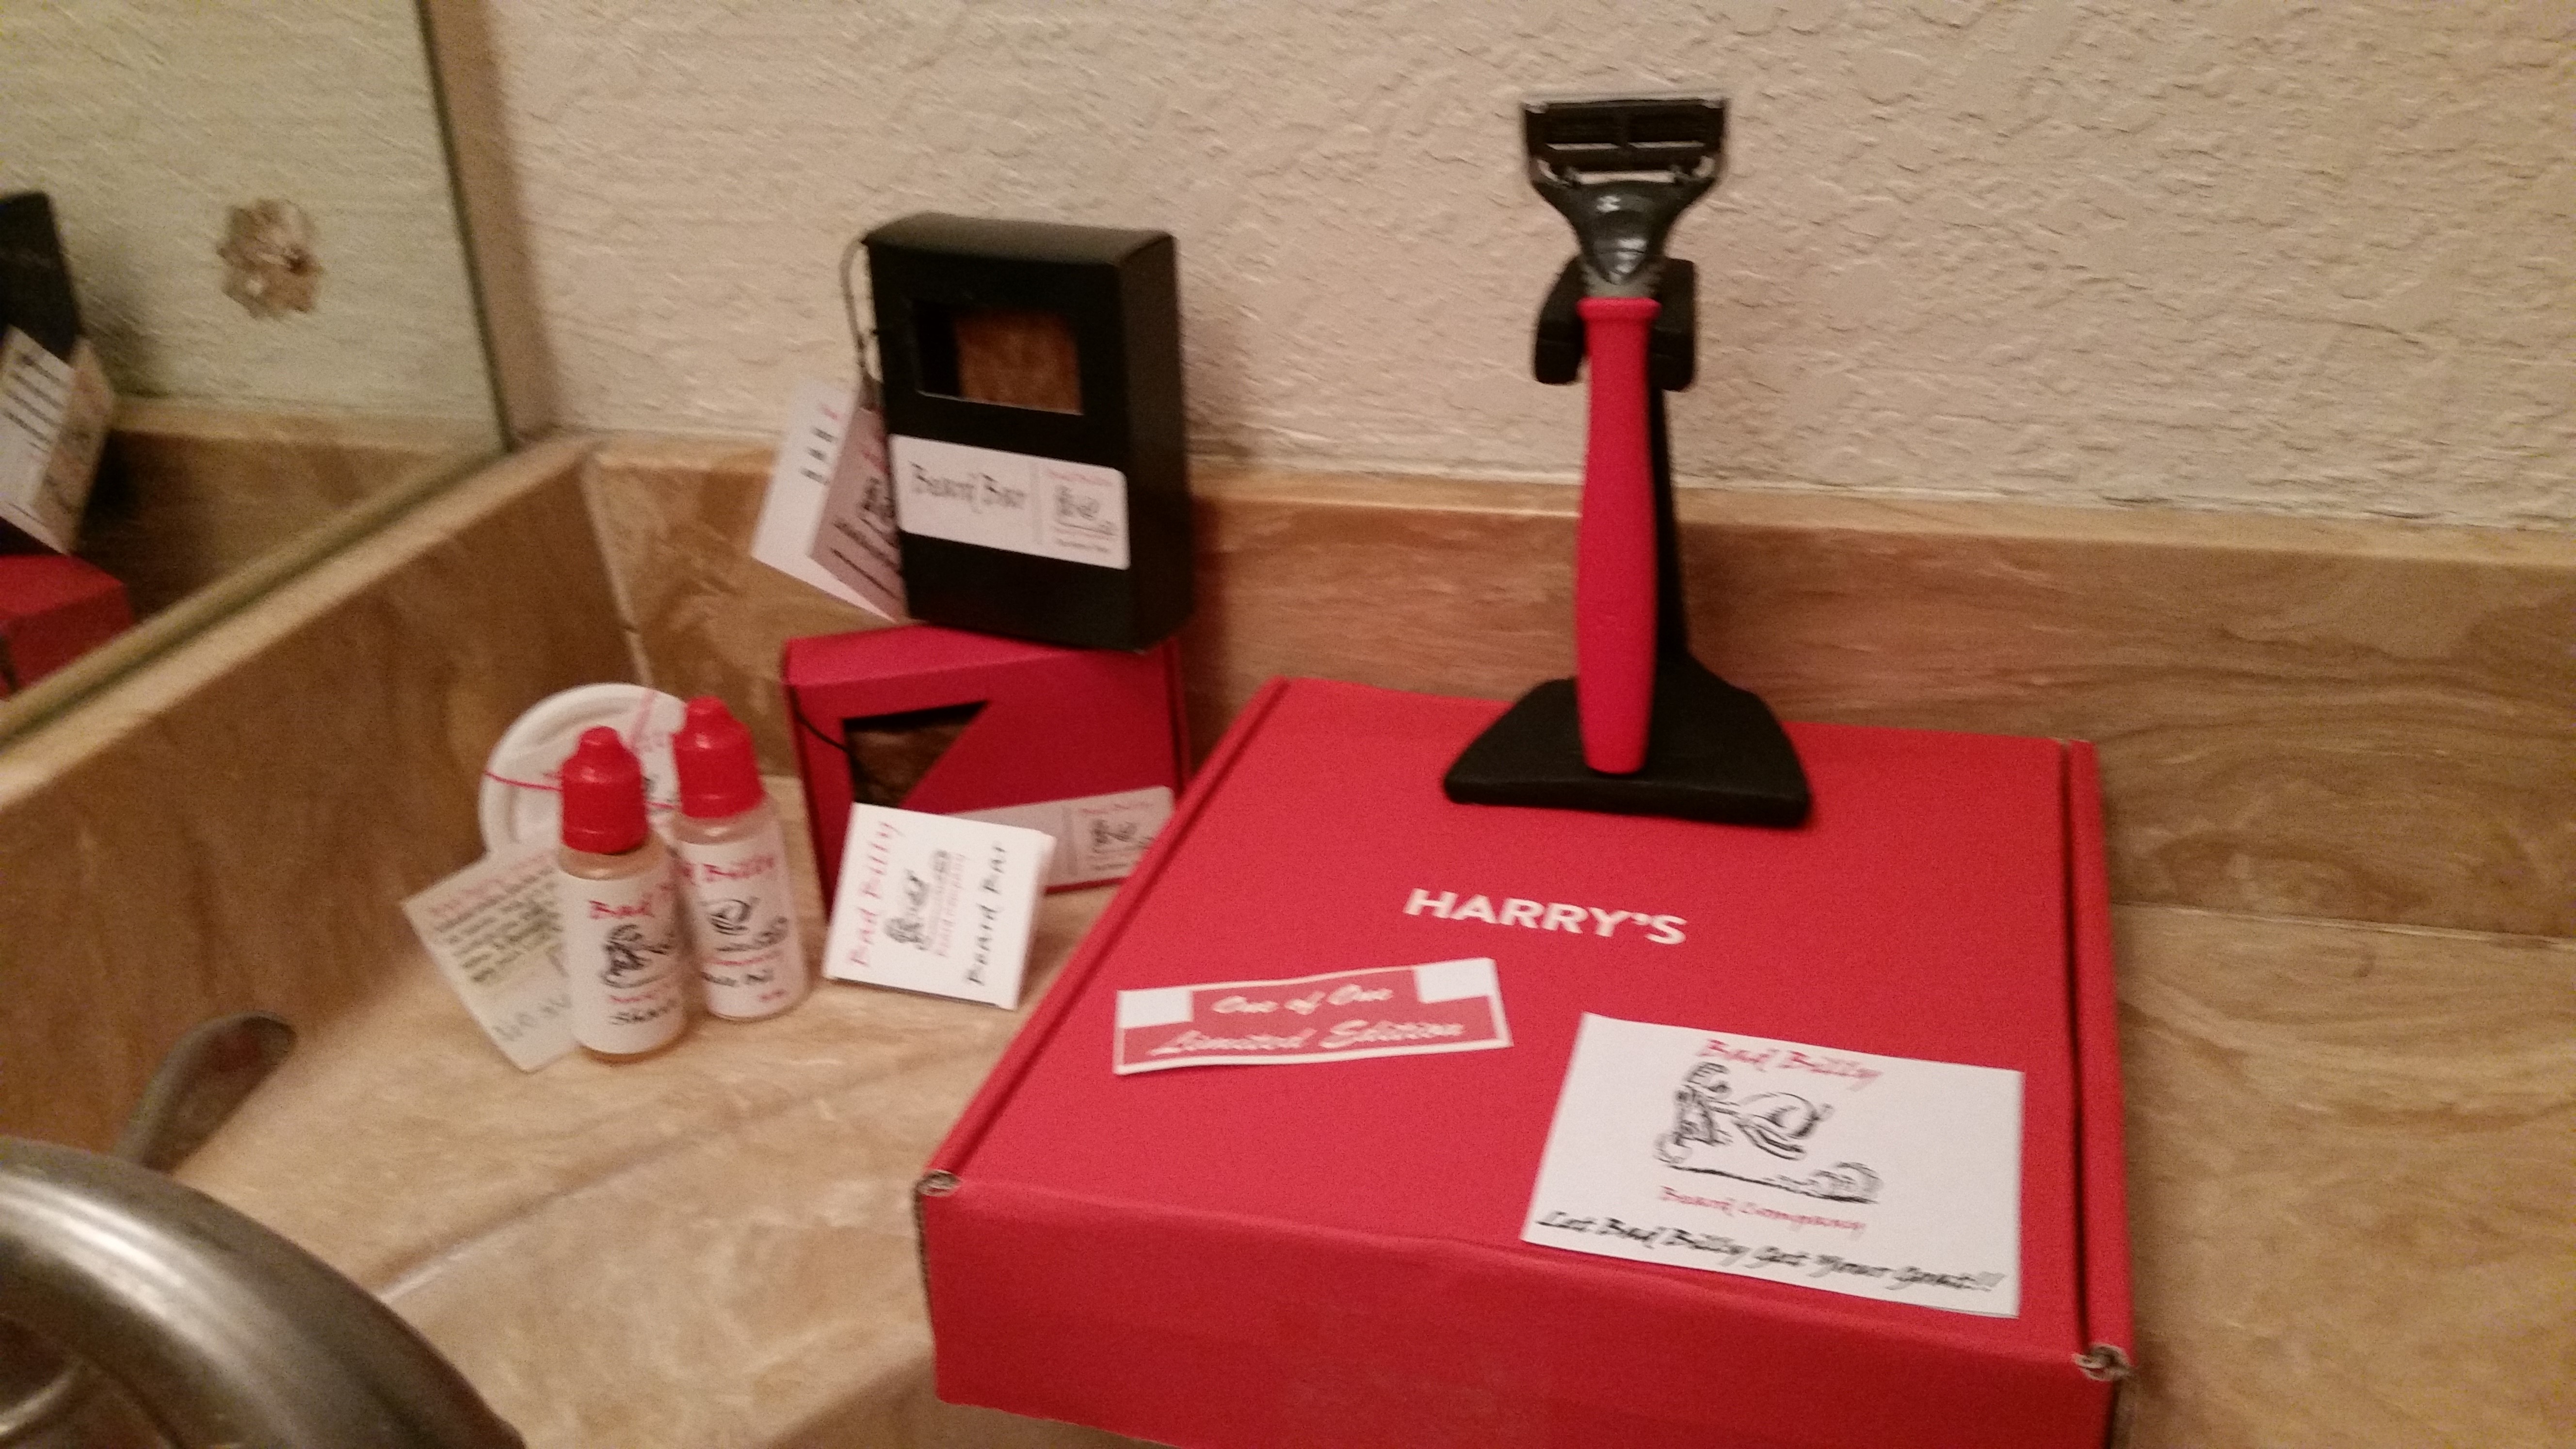 So here’s my new “One of One, Limited Edition” razor resting against the exclusive Bad Billy Beard black razor stand and sitting by Bad Billy Shave oil, Bad Billy Beard Bars and in the back, Bad Billy Beard Balm!! All in our signature colors of red, black and white. We couldn’t be more proud!! Harrys and BB!